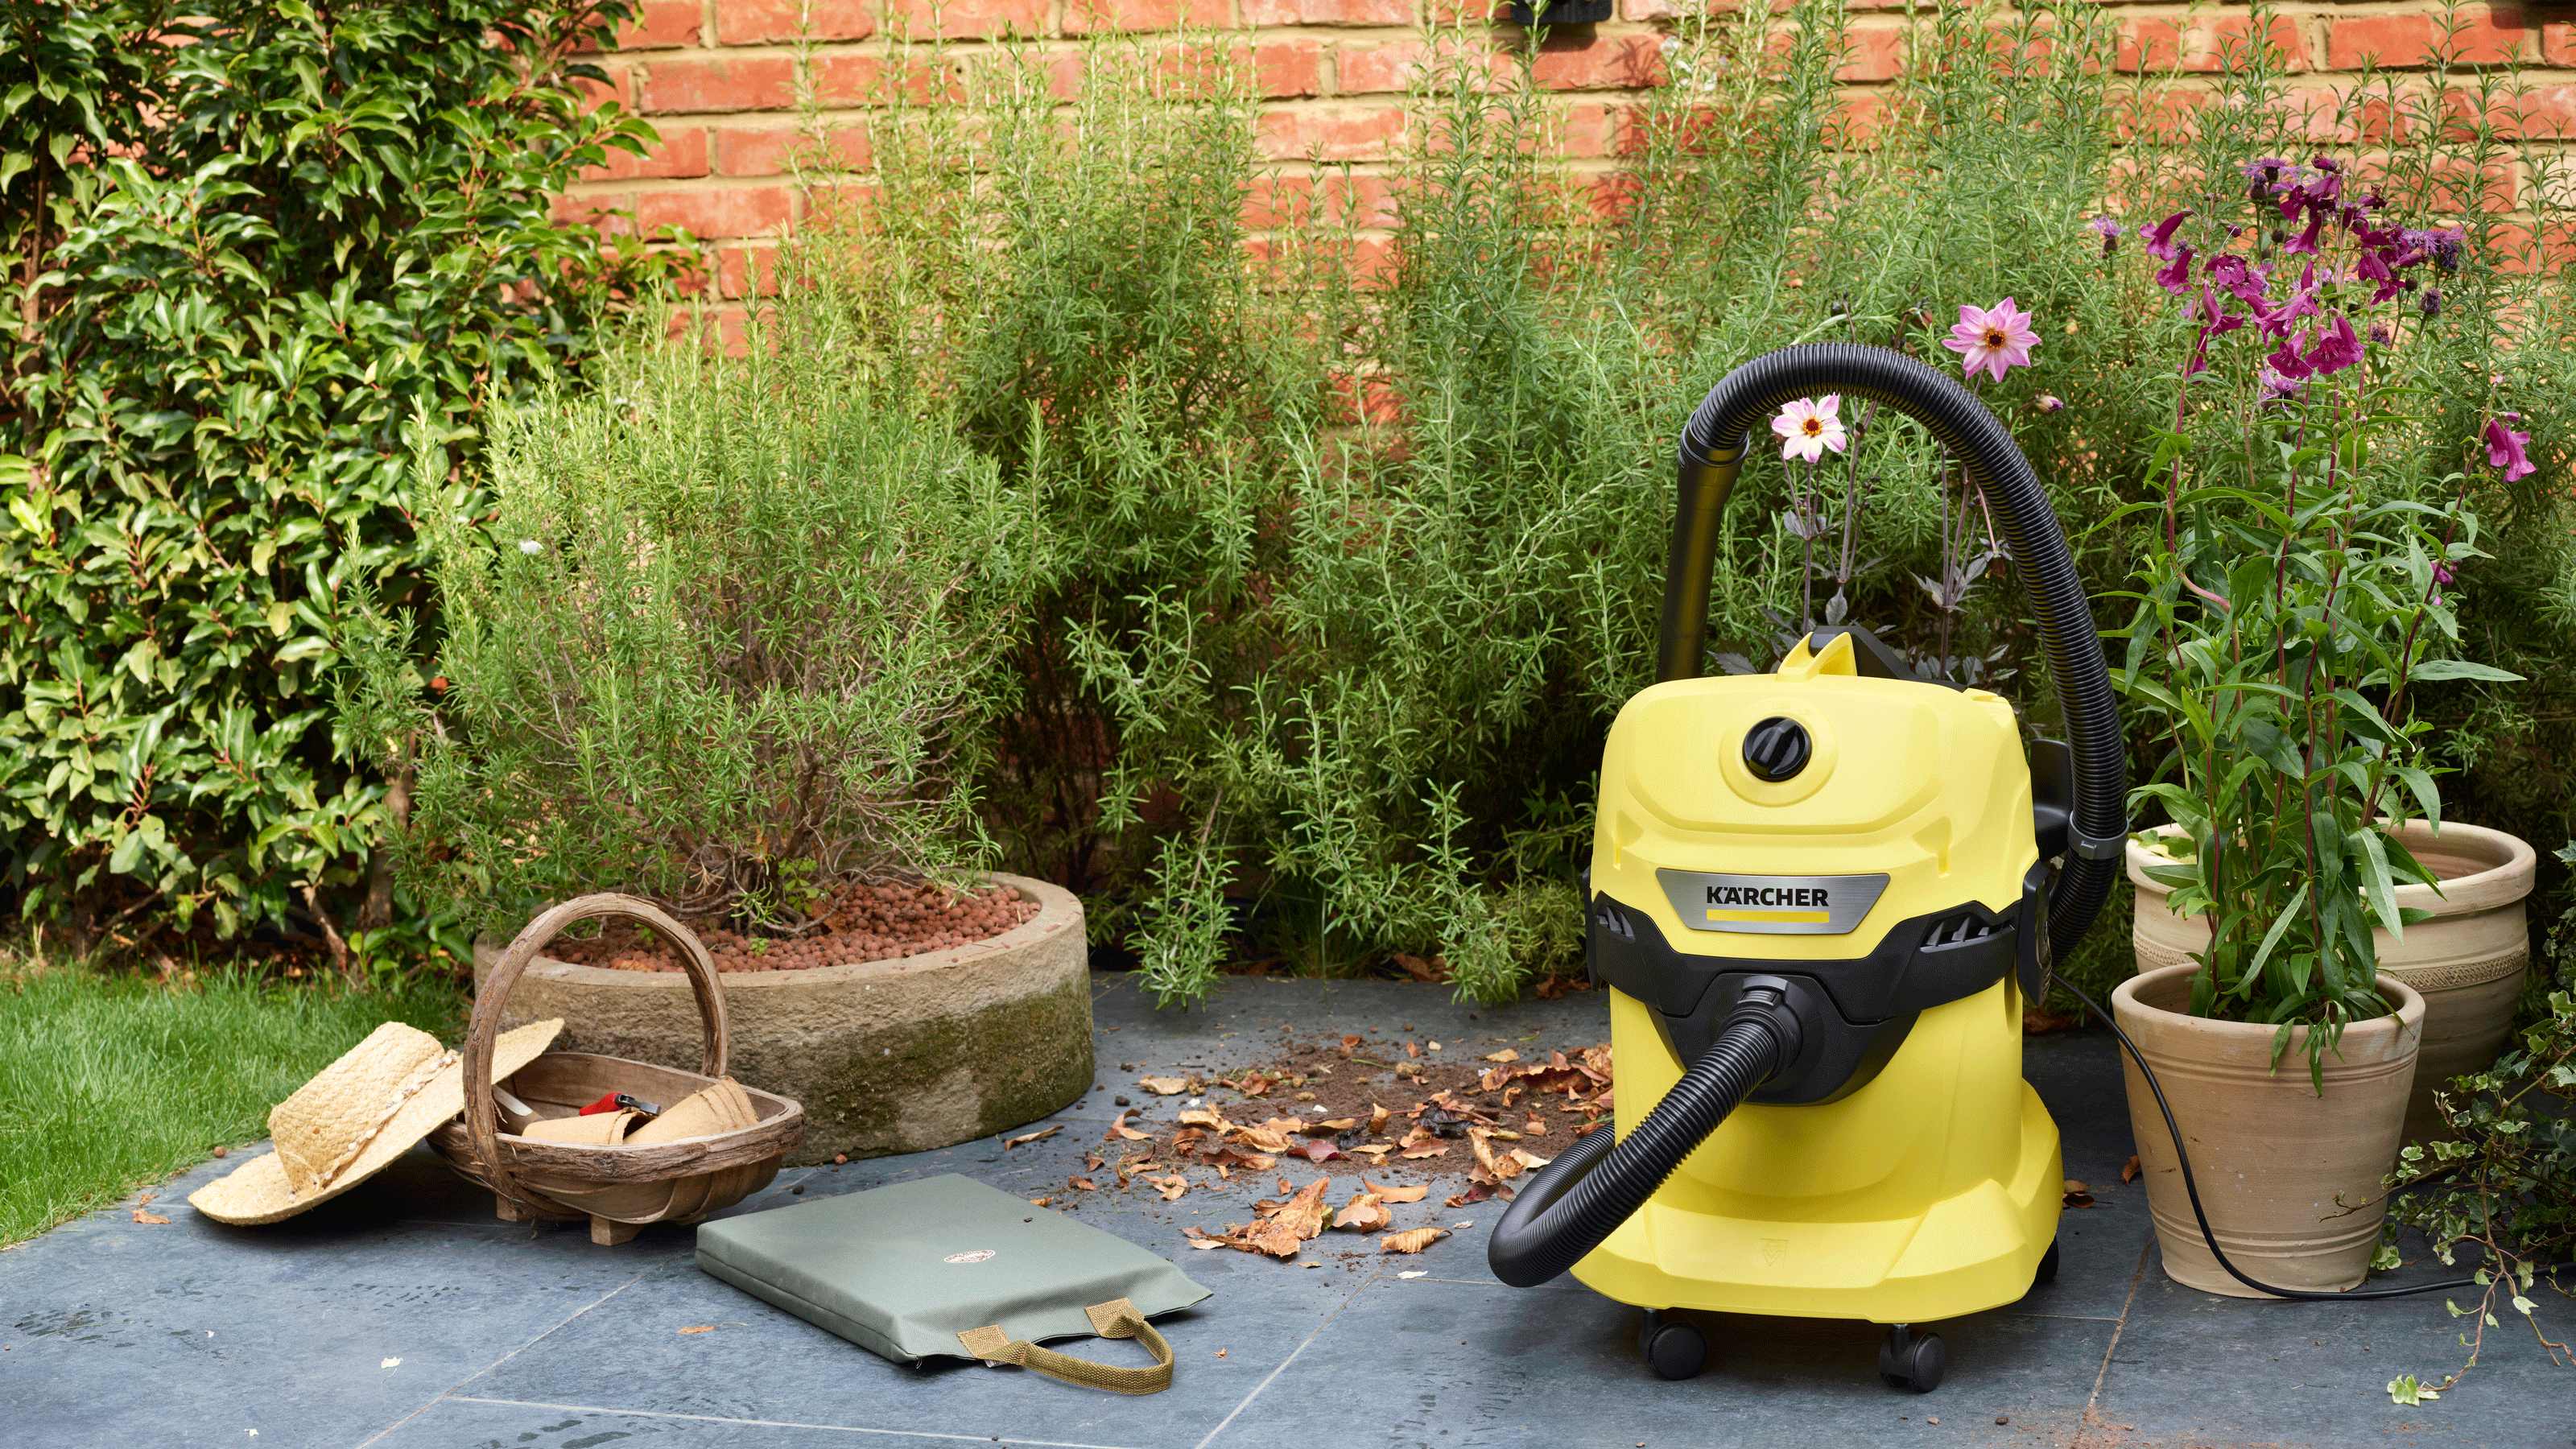 Karcher wet and dry vacuum cleaner in yellow